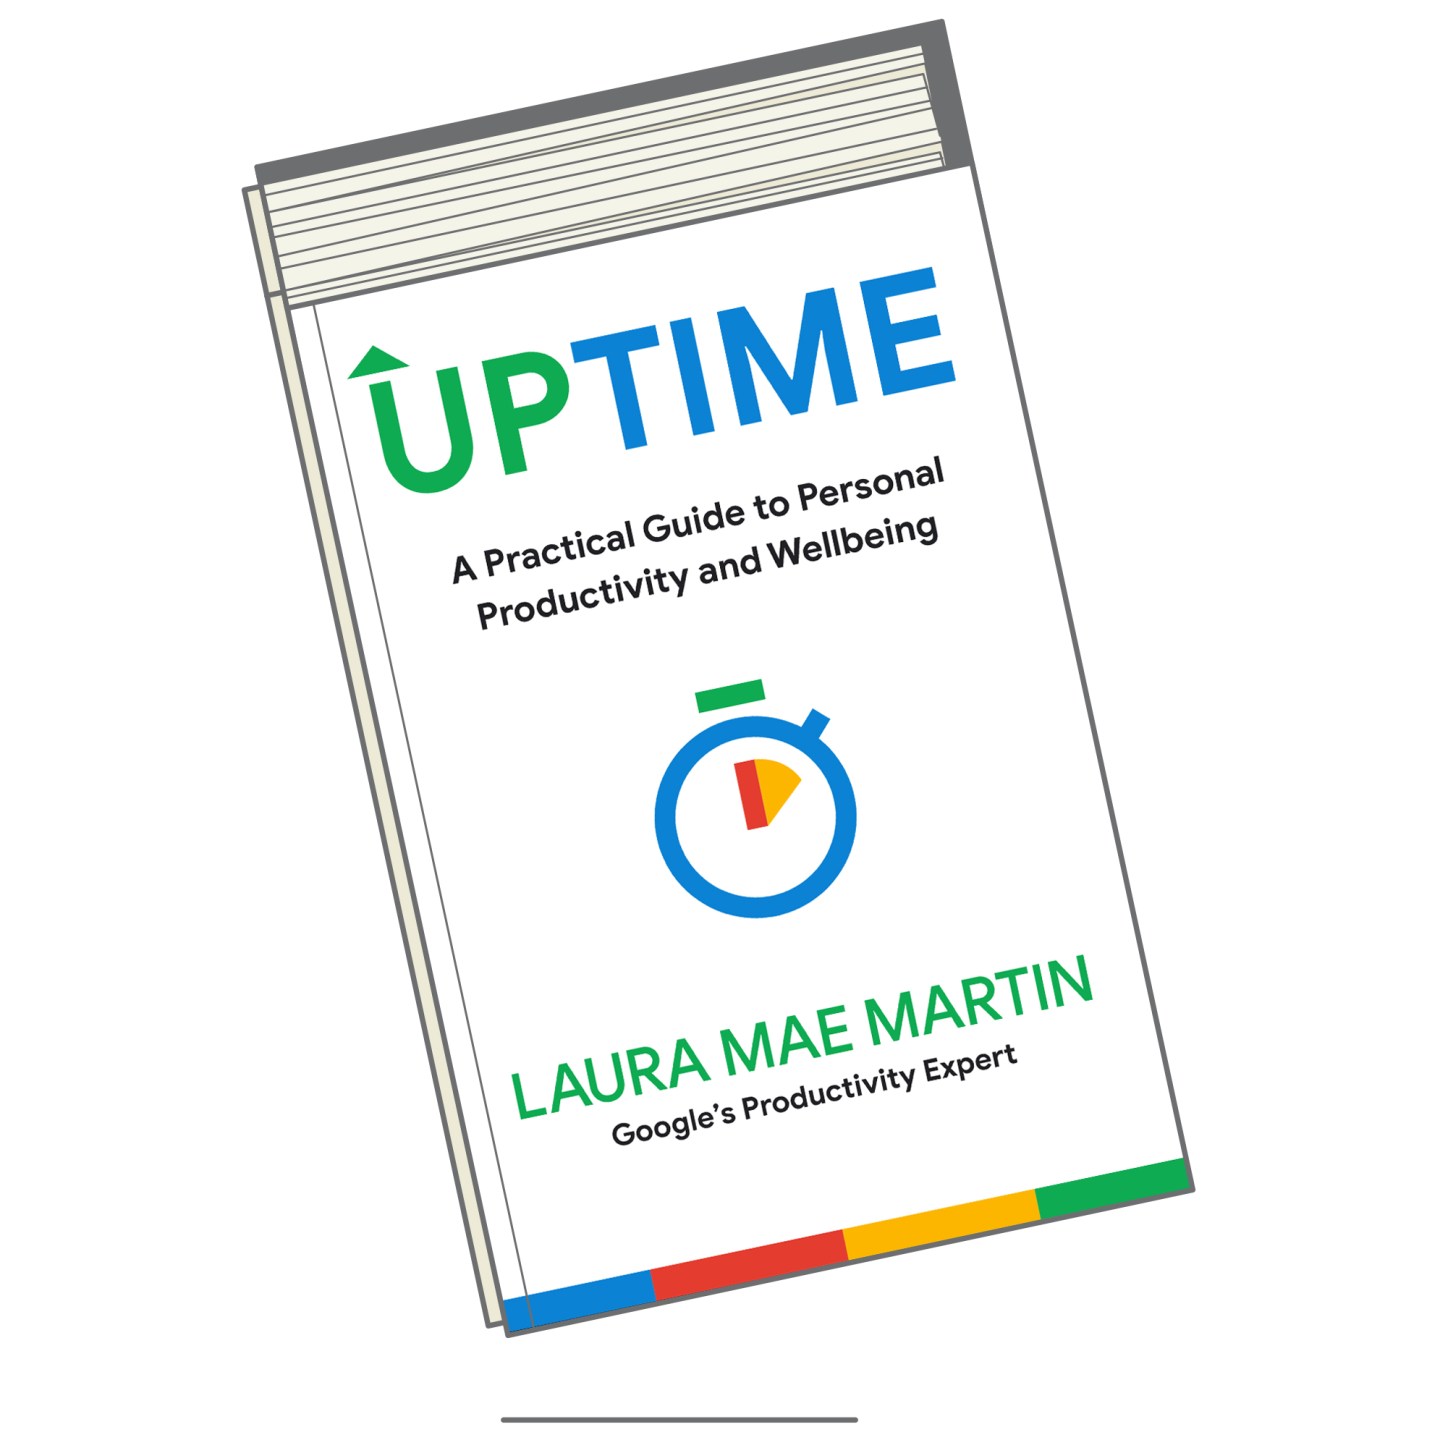 Google's Executive Productivity Officer Laura Mae Martin's new book UPTIME.